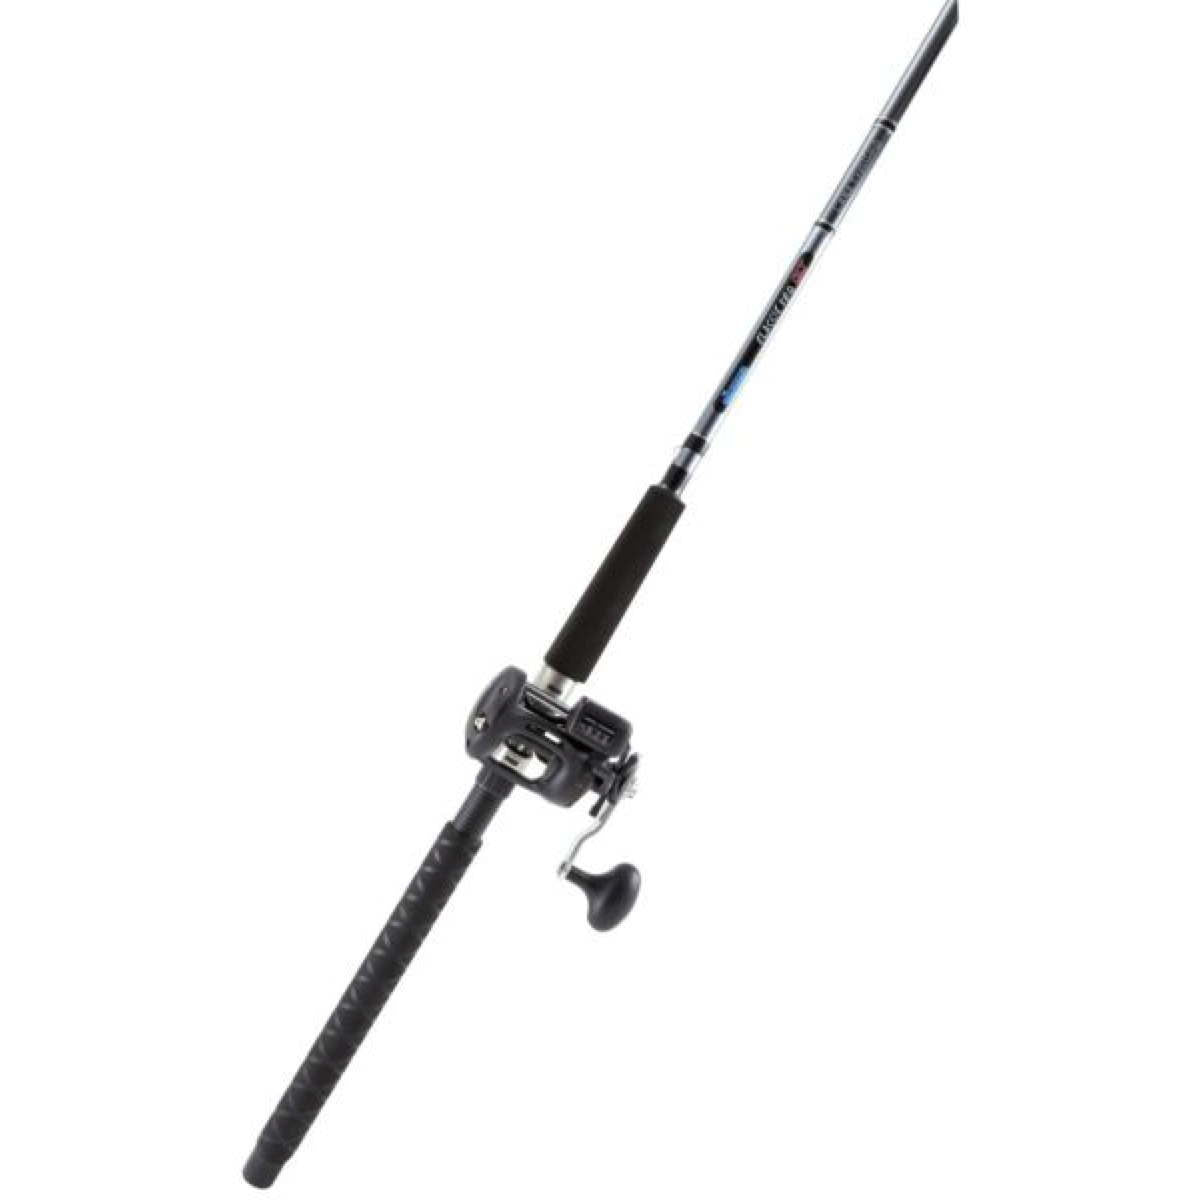 Photo of Okuma Great Lakes Trolling Combo for sale at United Tackle Shops.